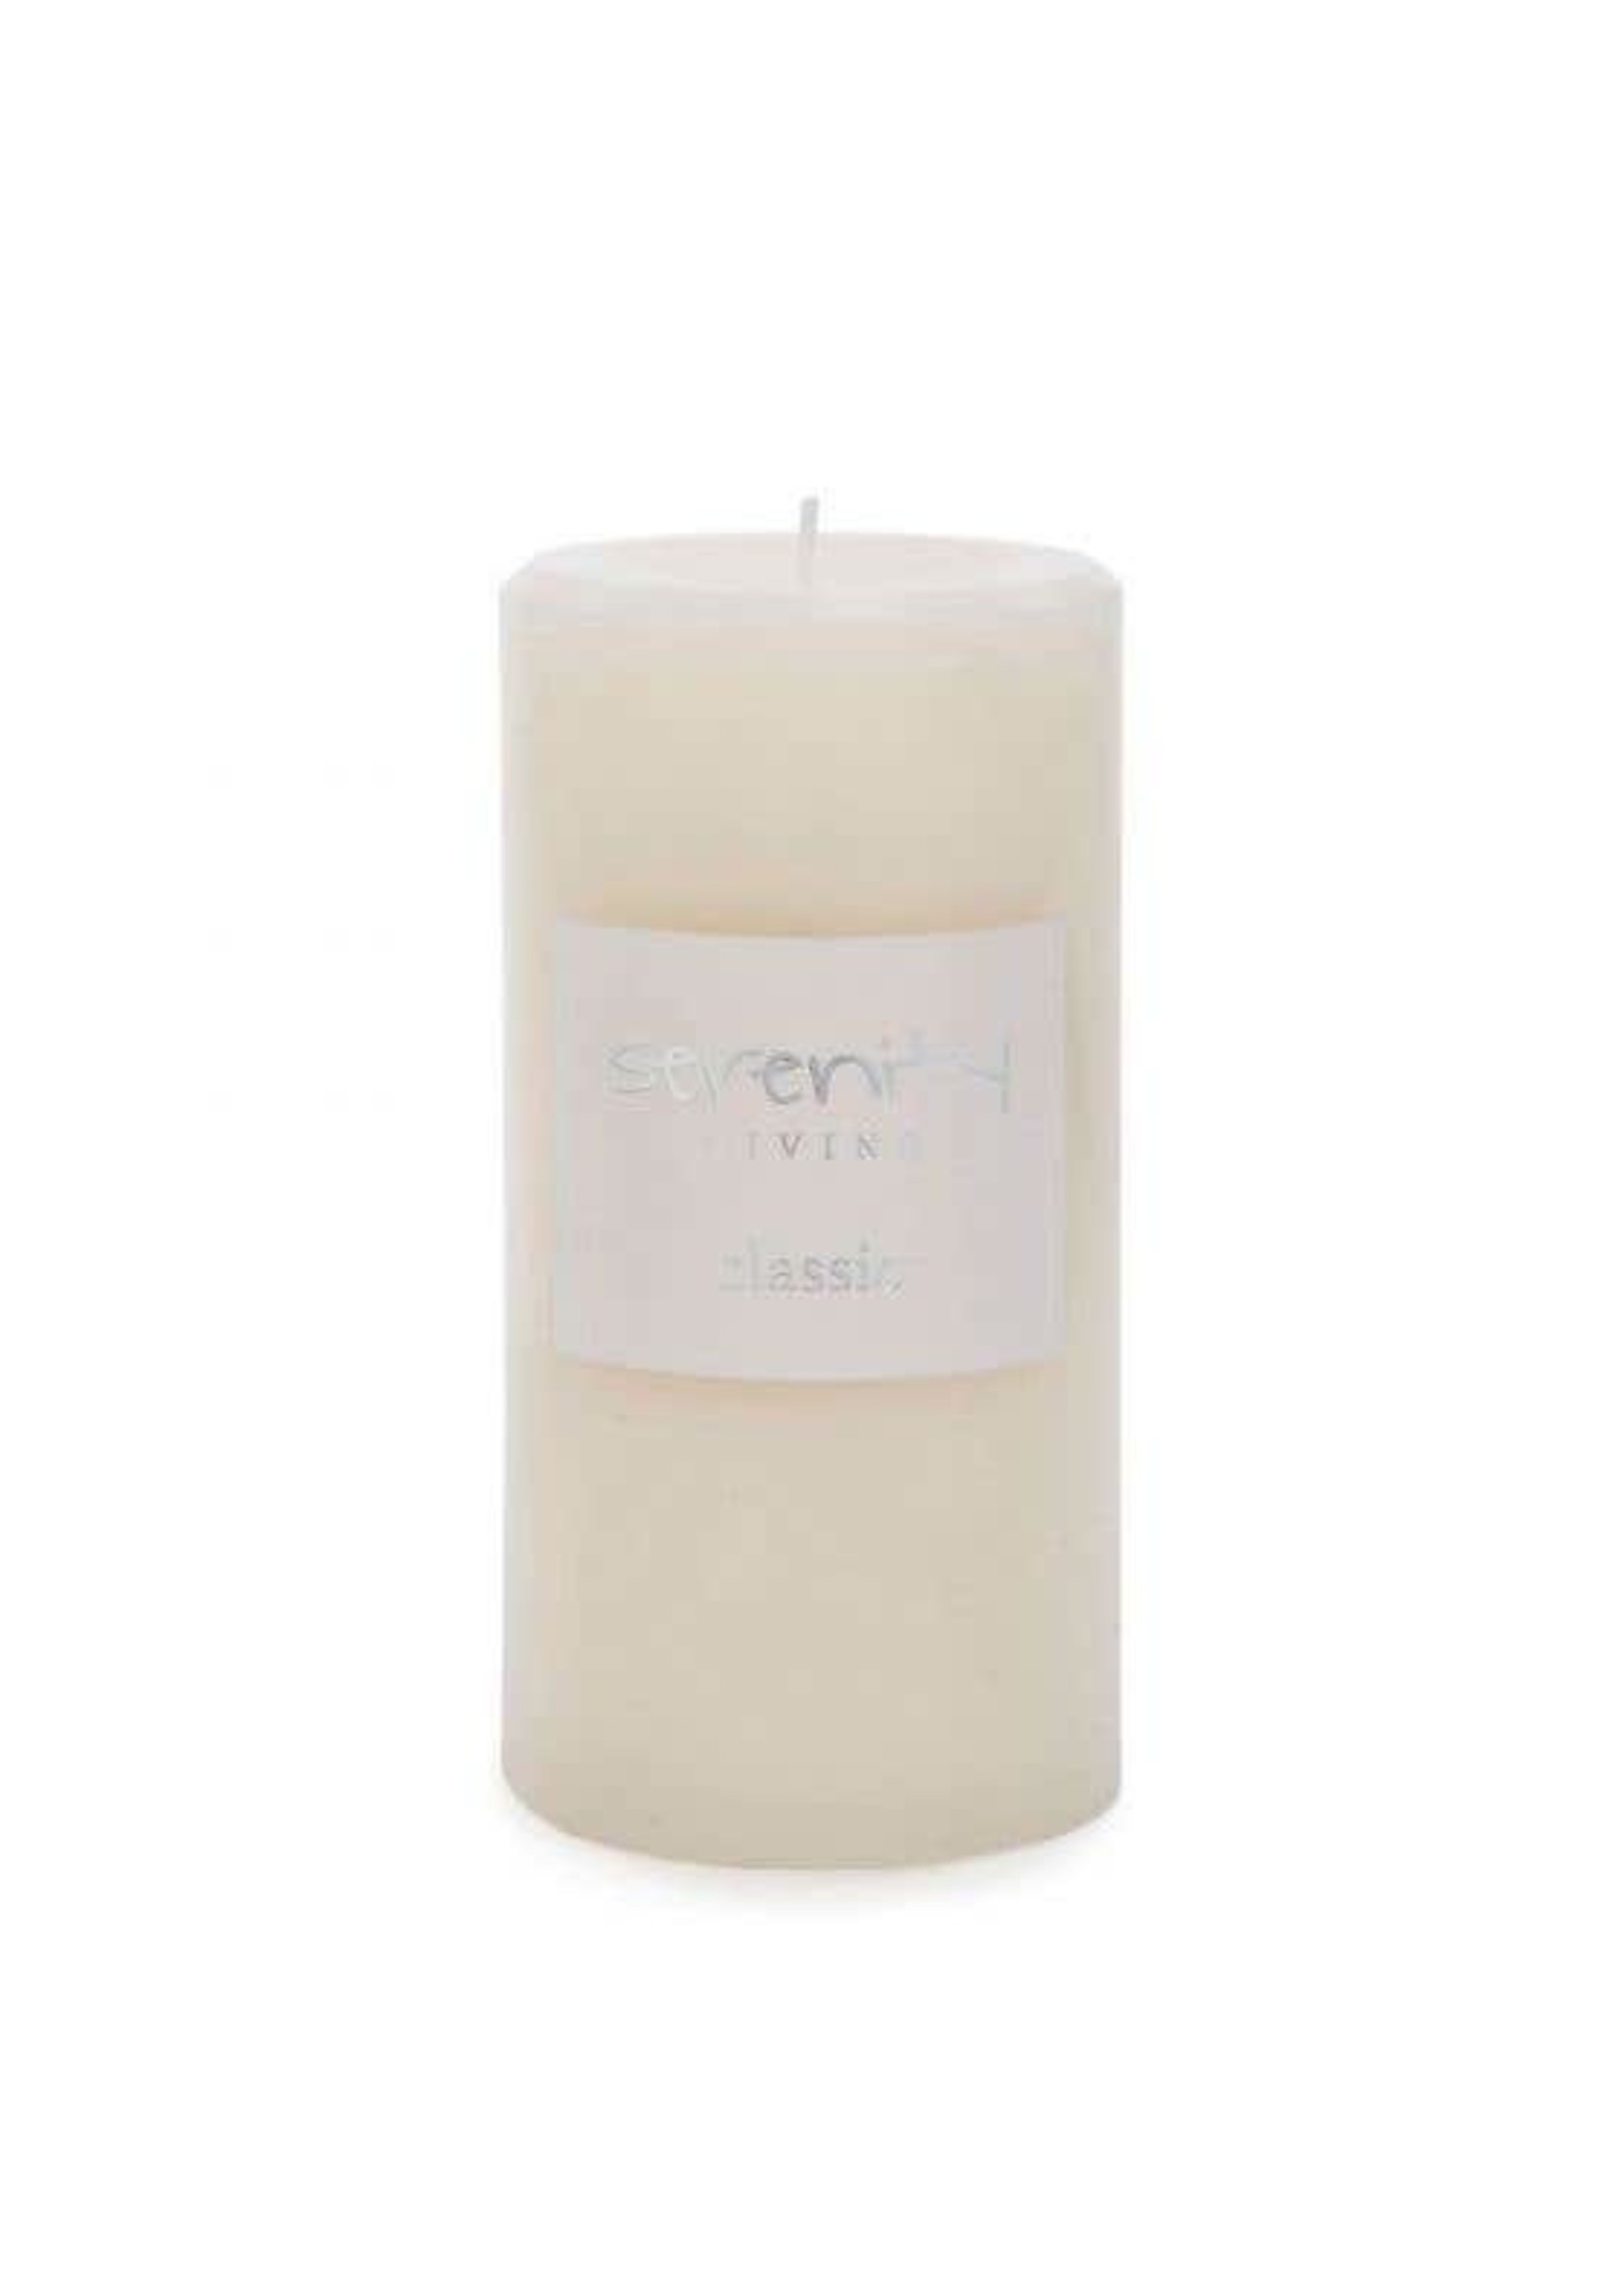 Serenity Living Real Wax Ivory Candle 6"